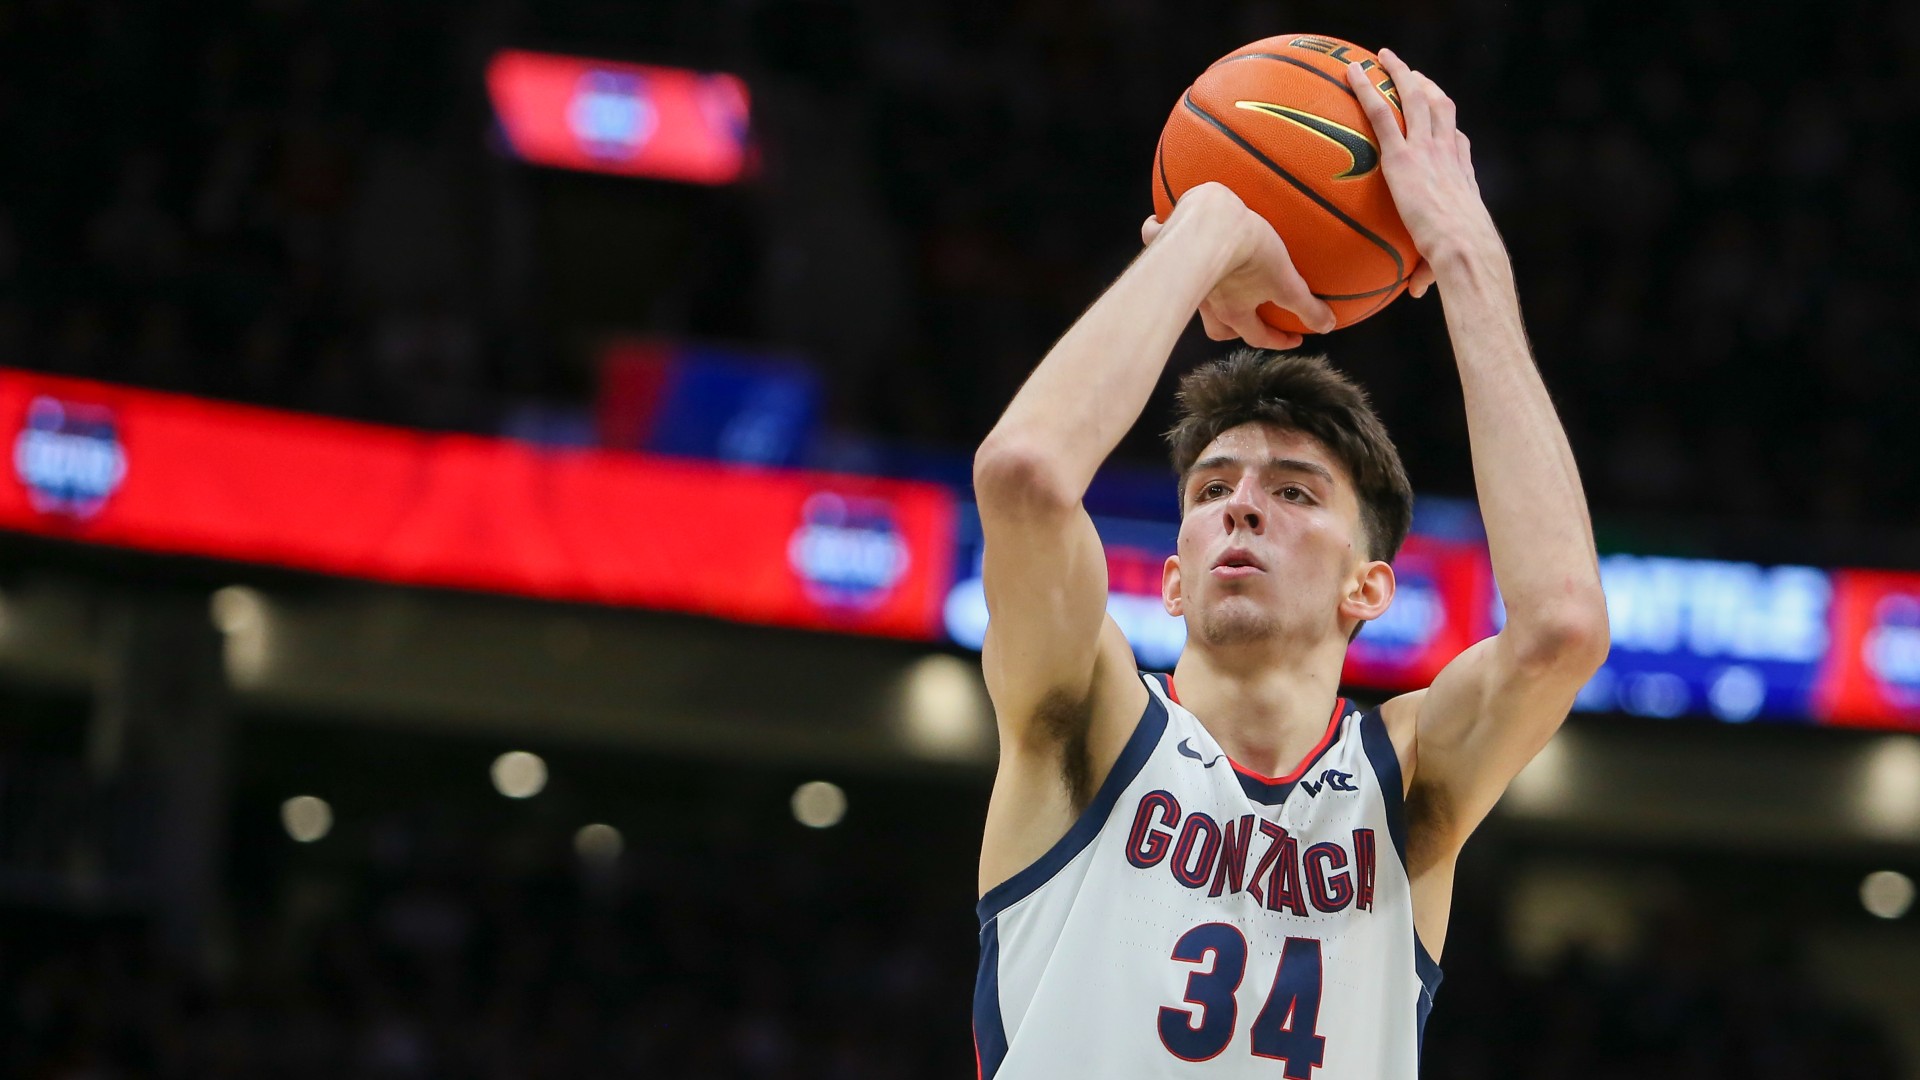 College Basketball Odds & Picks: Our Staff’s 3 Best Bets for Thursday, Including Merrimack vs. Gonzaga article feature image